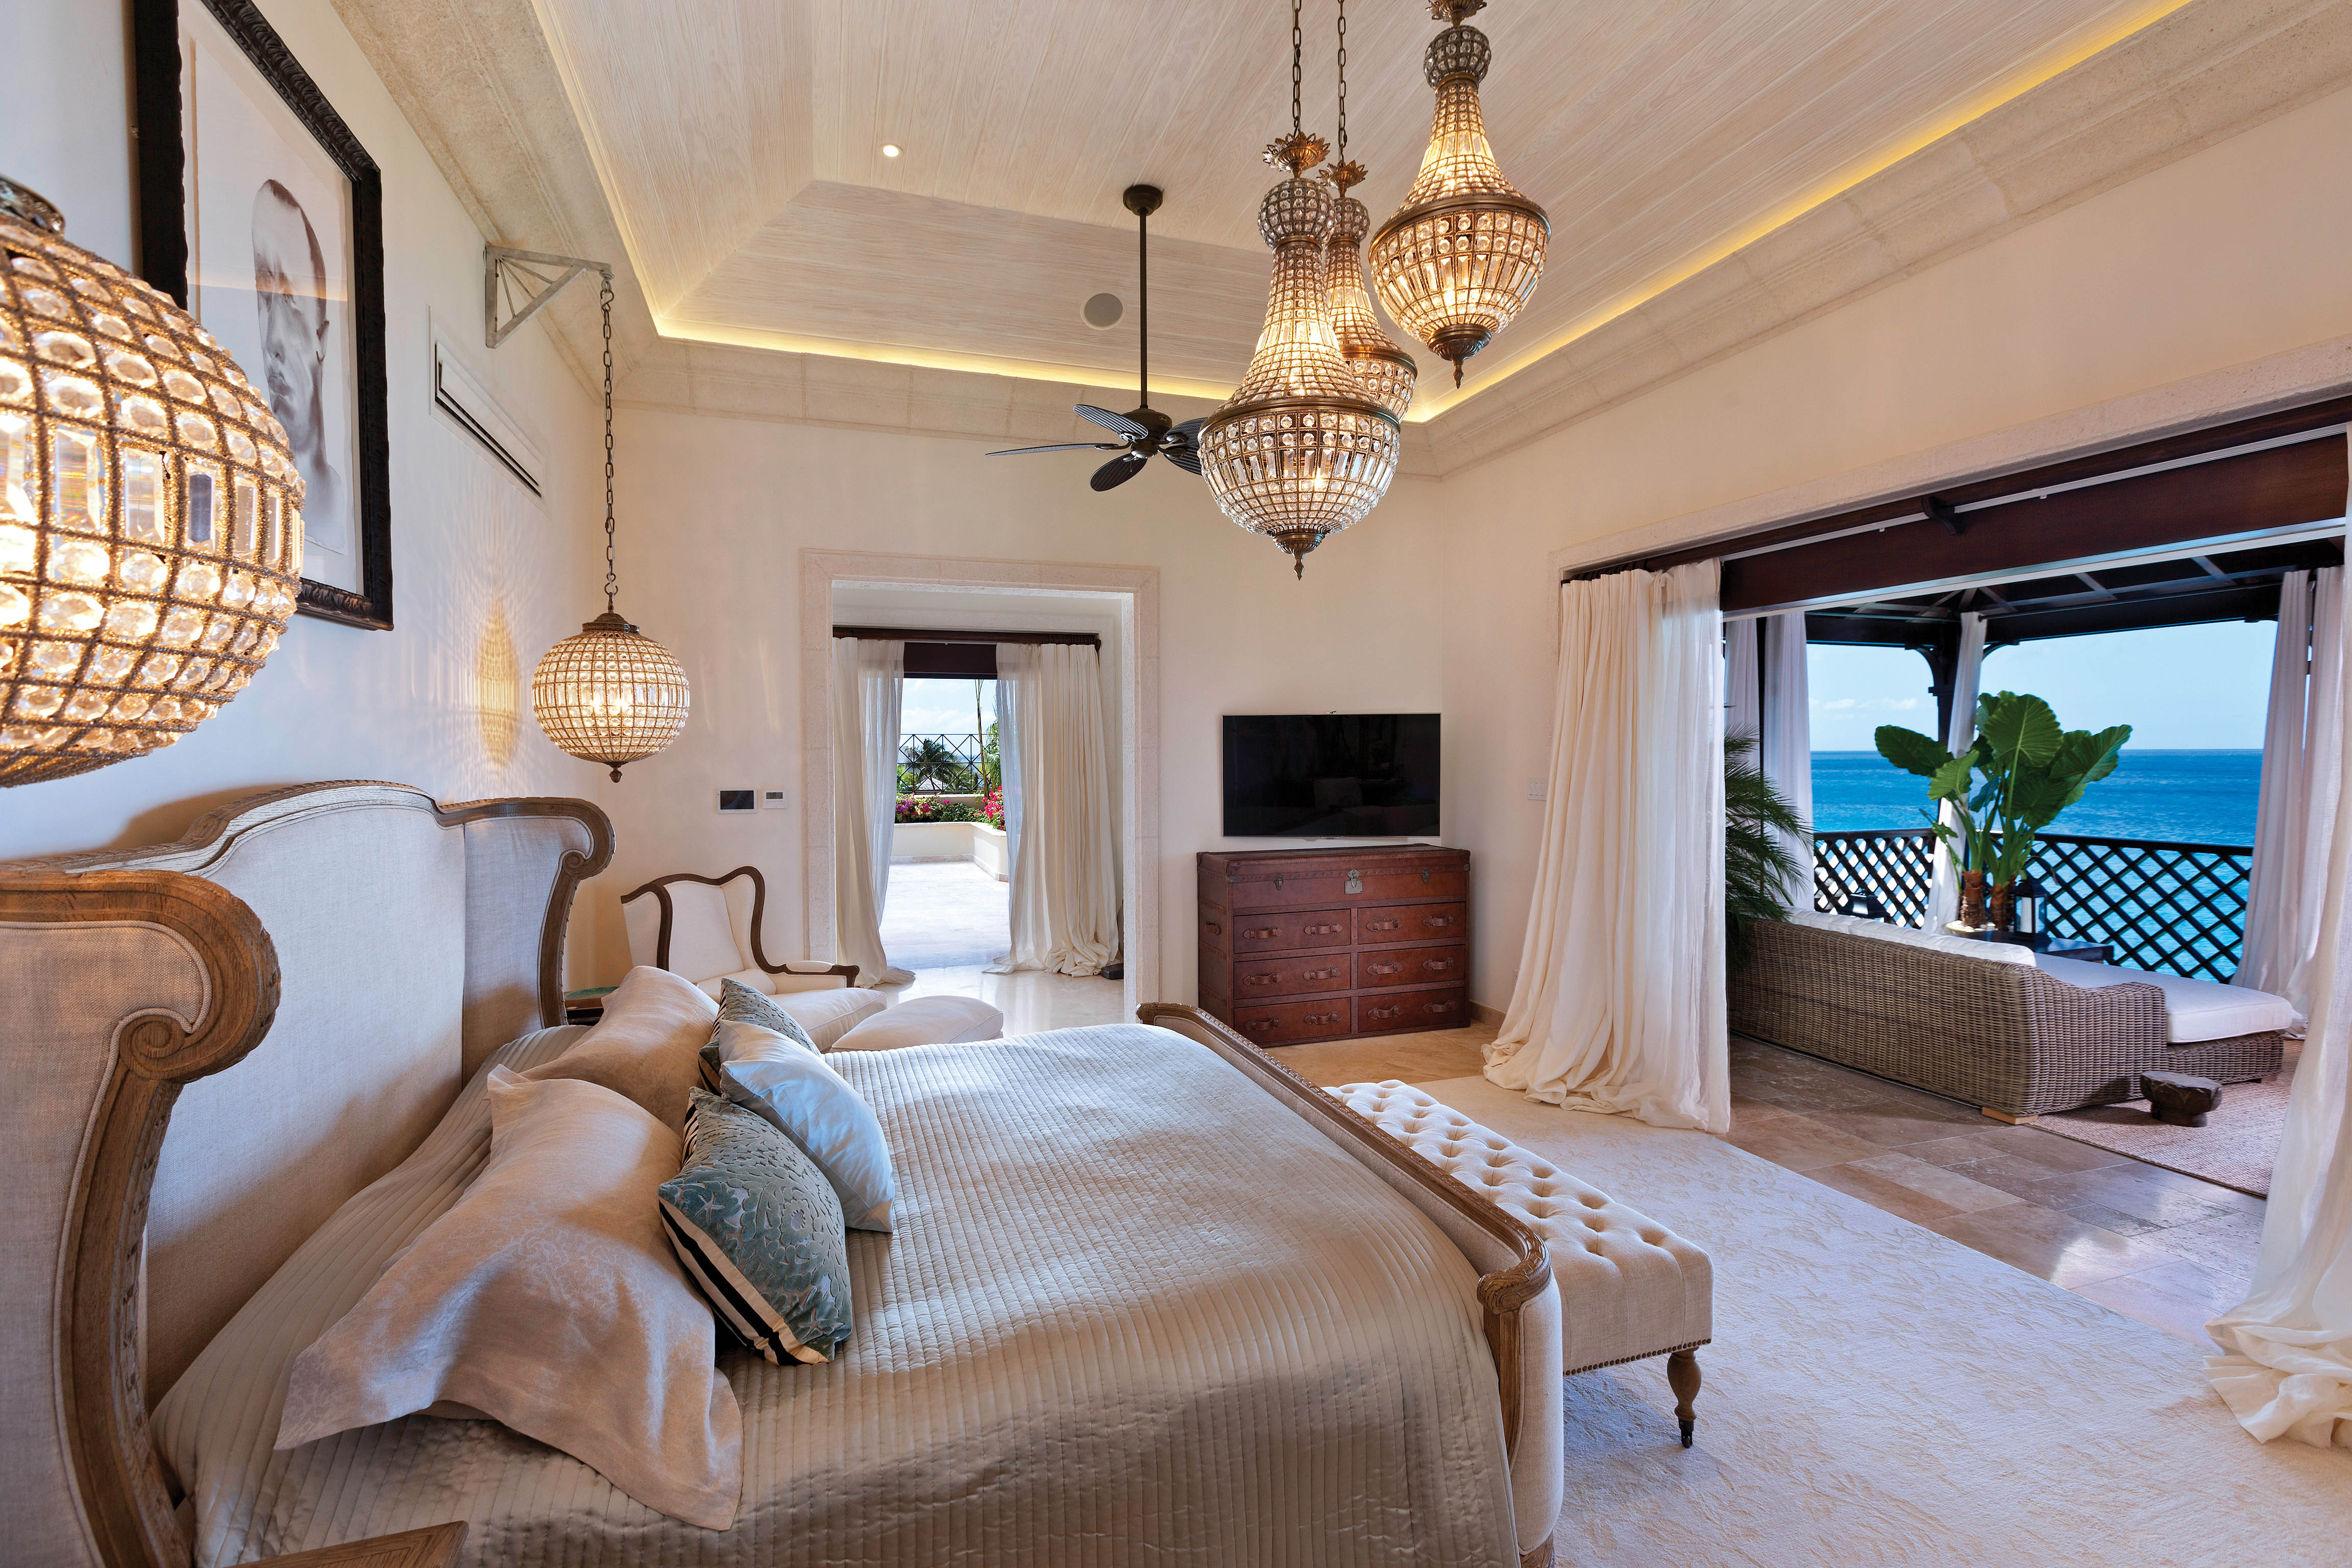 A unique Barbados vacation option, the four-bedroom Langara spans the top floor of the exclusive Sandy Cove residential development on the Platinum Coast of Barbados.